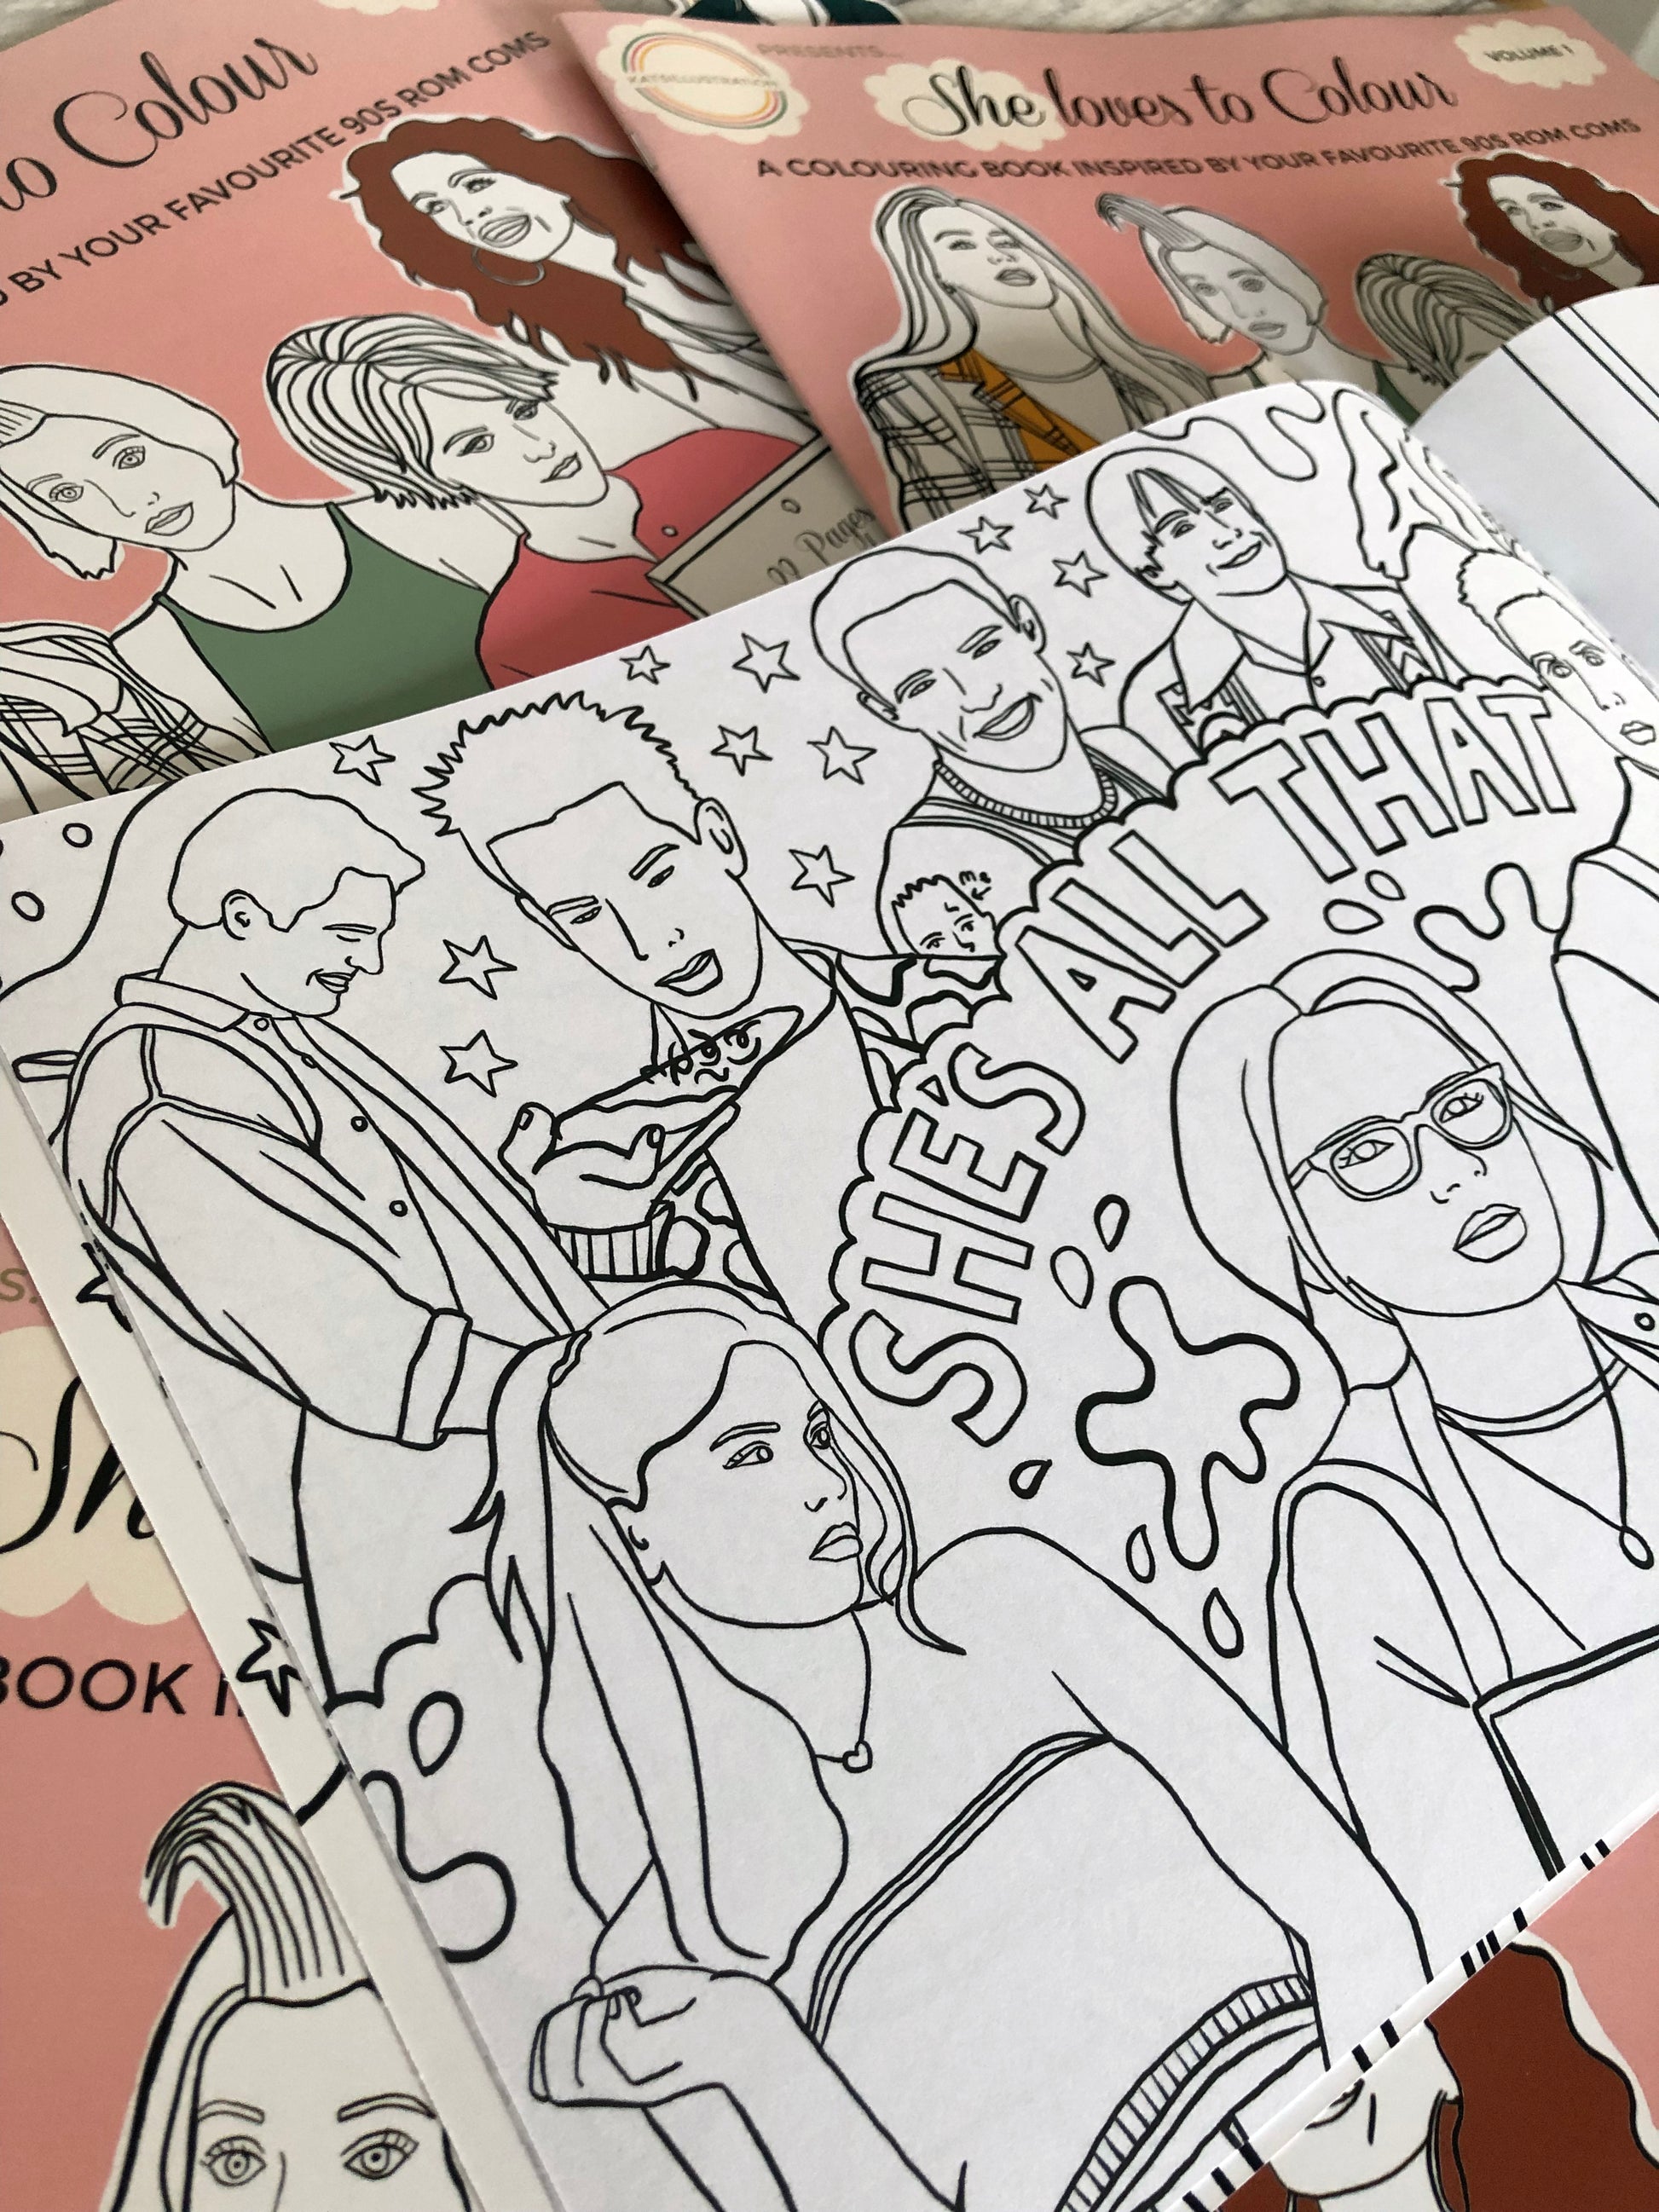 Fun, colouring book inspired by 90s rom com movies.